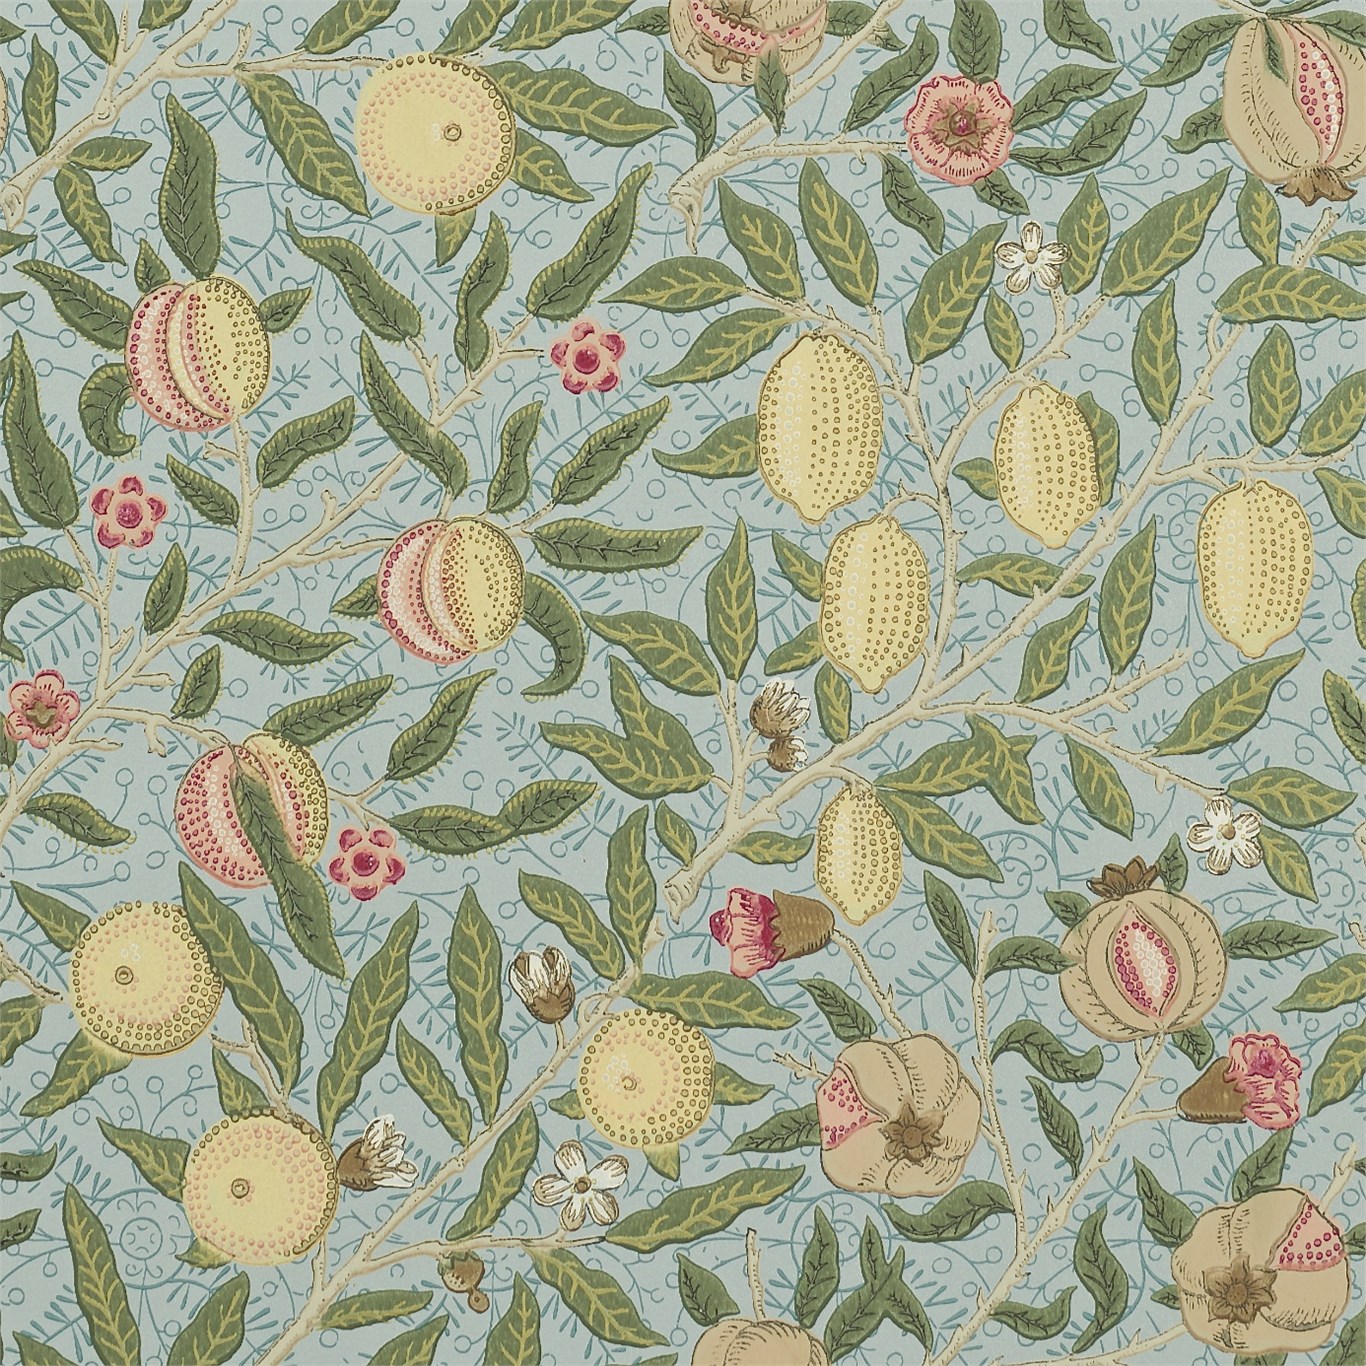 Co Arts And Crafts Fabrics Wallpaper Designs By William Morris